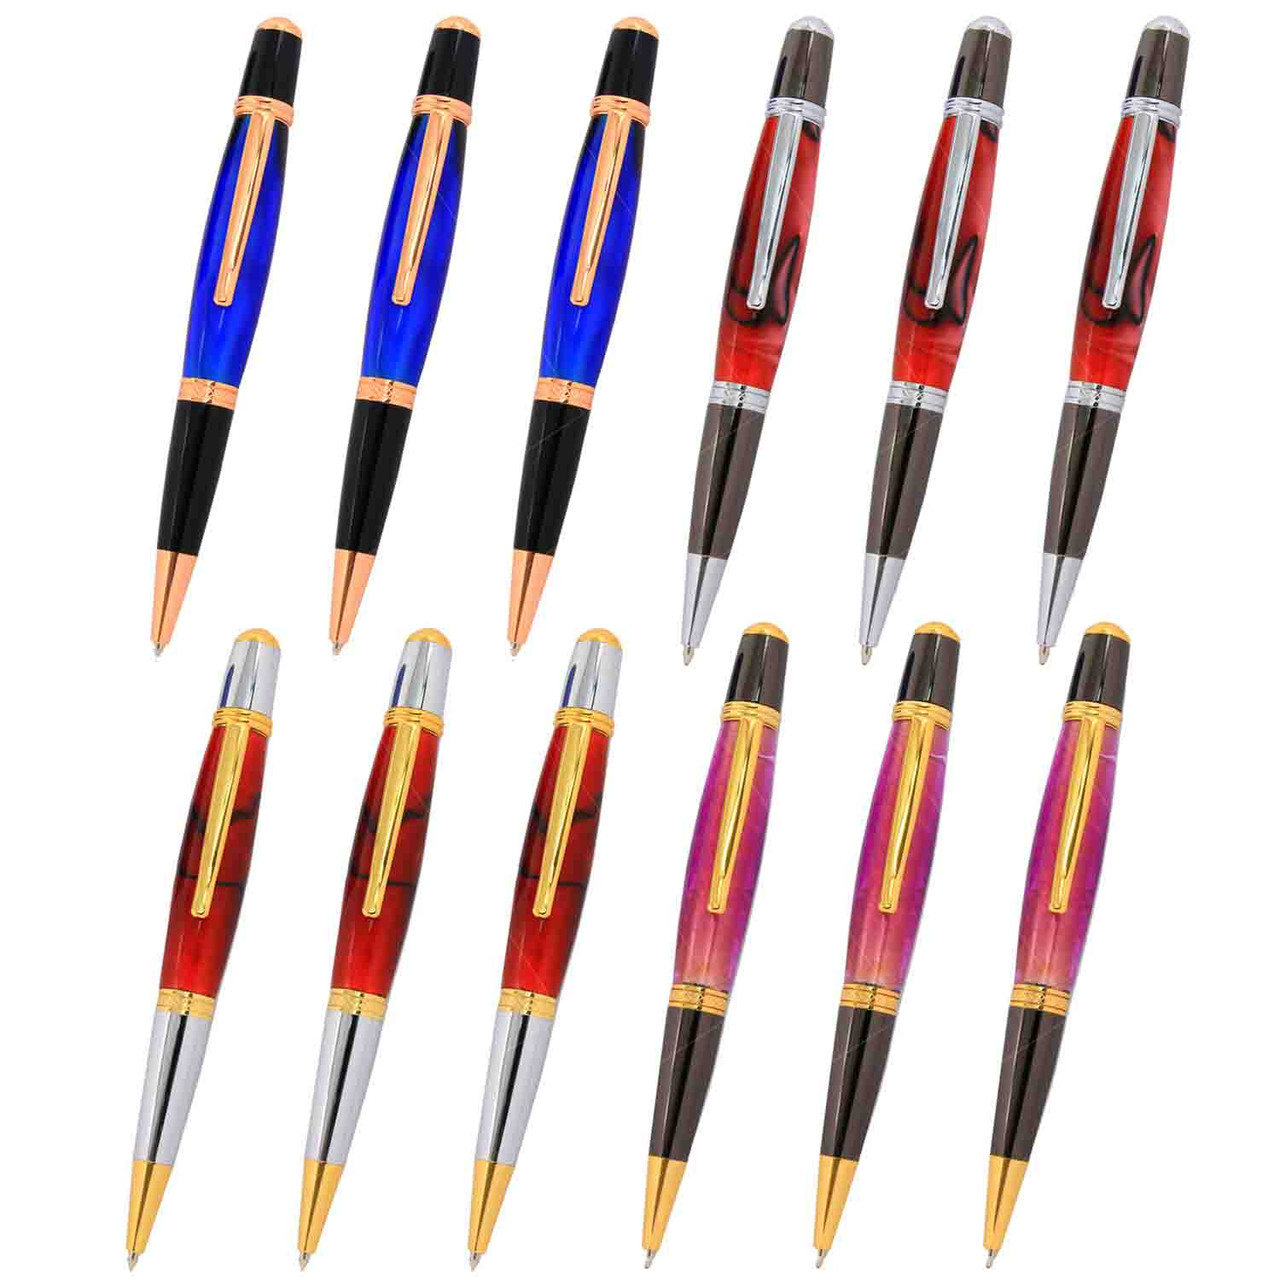 Legacy Viceroy Pen Kit, 12 Piece Variety Pack with Gold, Chome, Copper Finishes